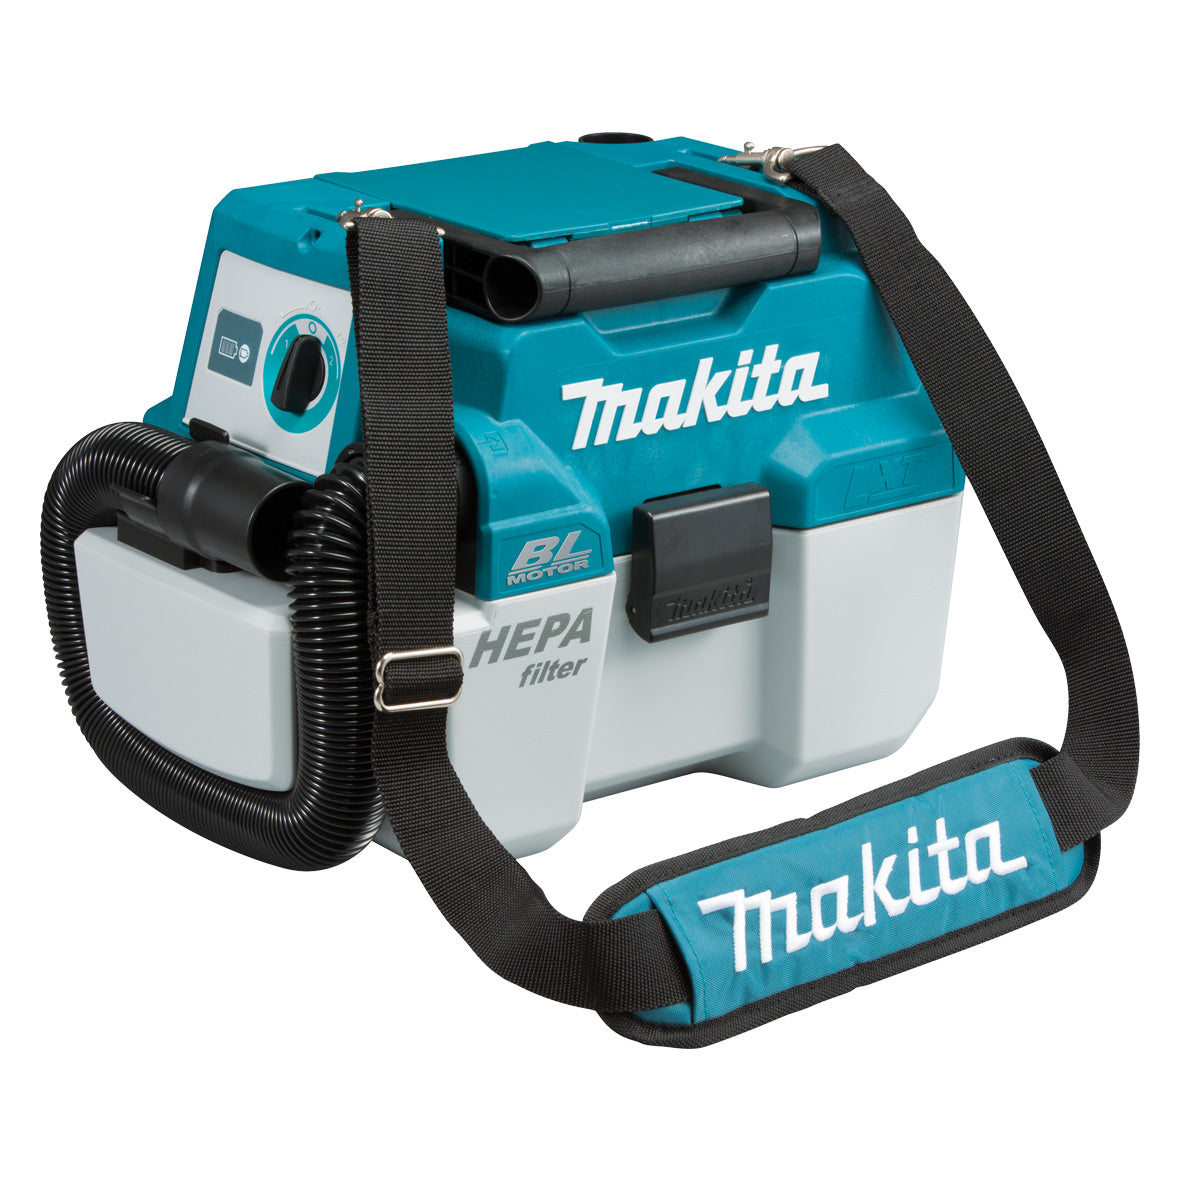 18V Brushless Wet/Dry Dust Extractor DVC750LZX1 Bare (Tool Only) by Makita